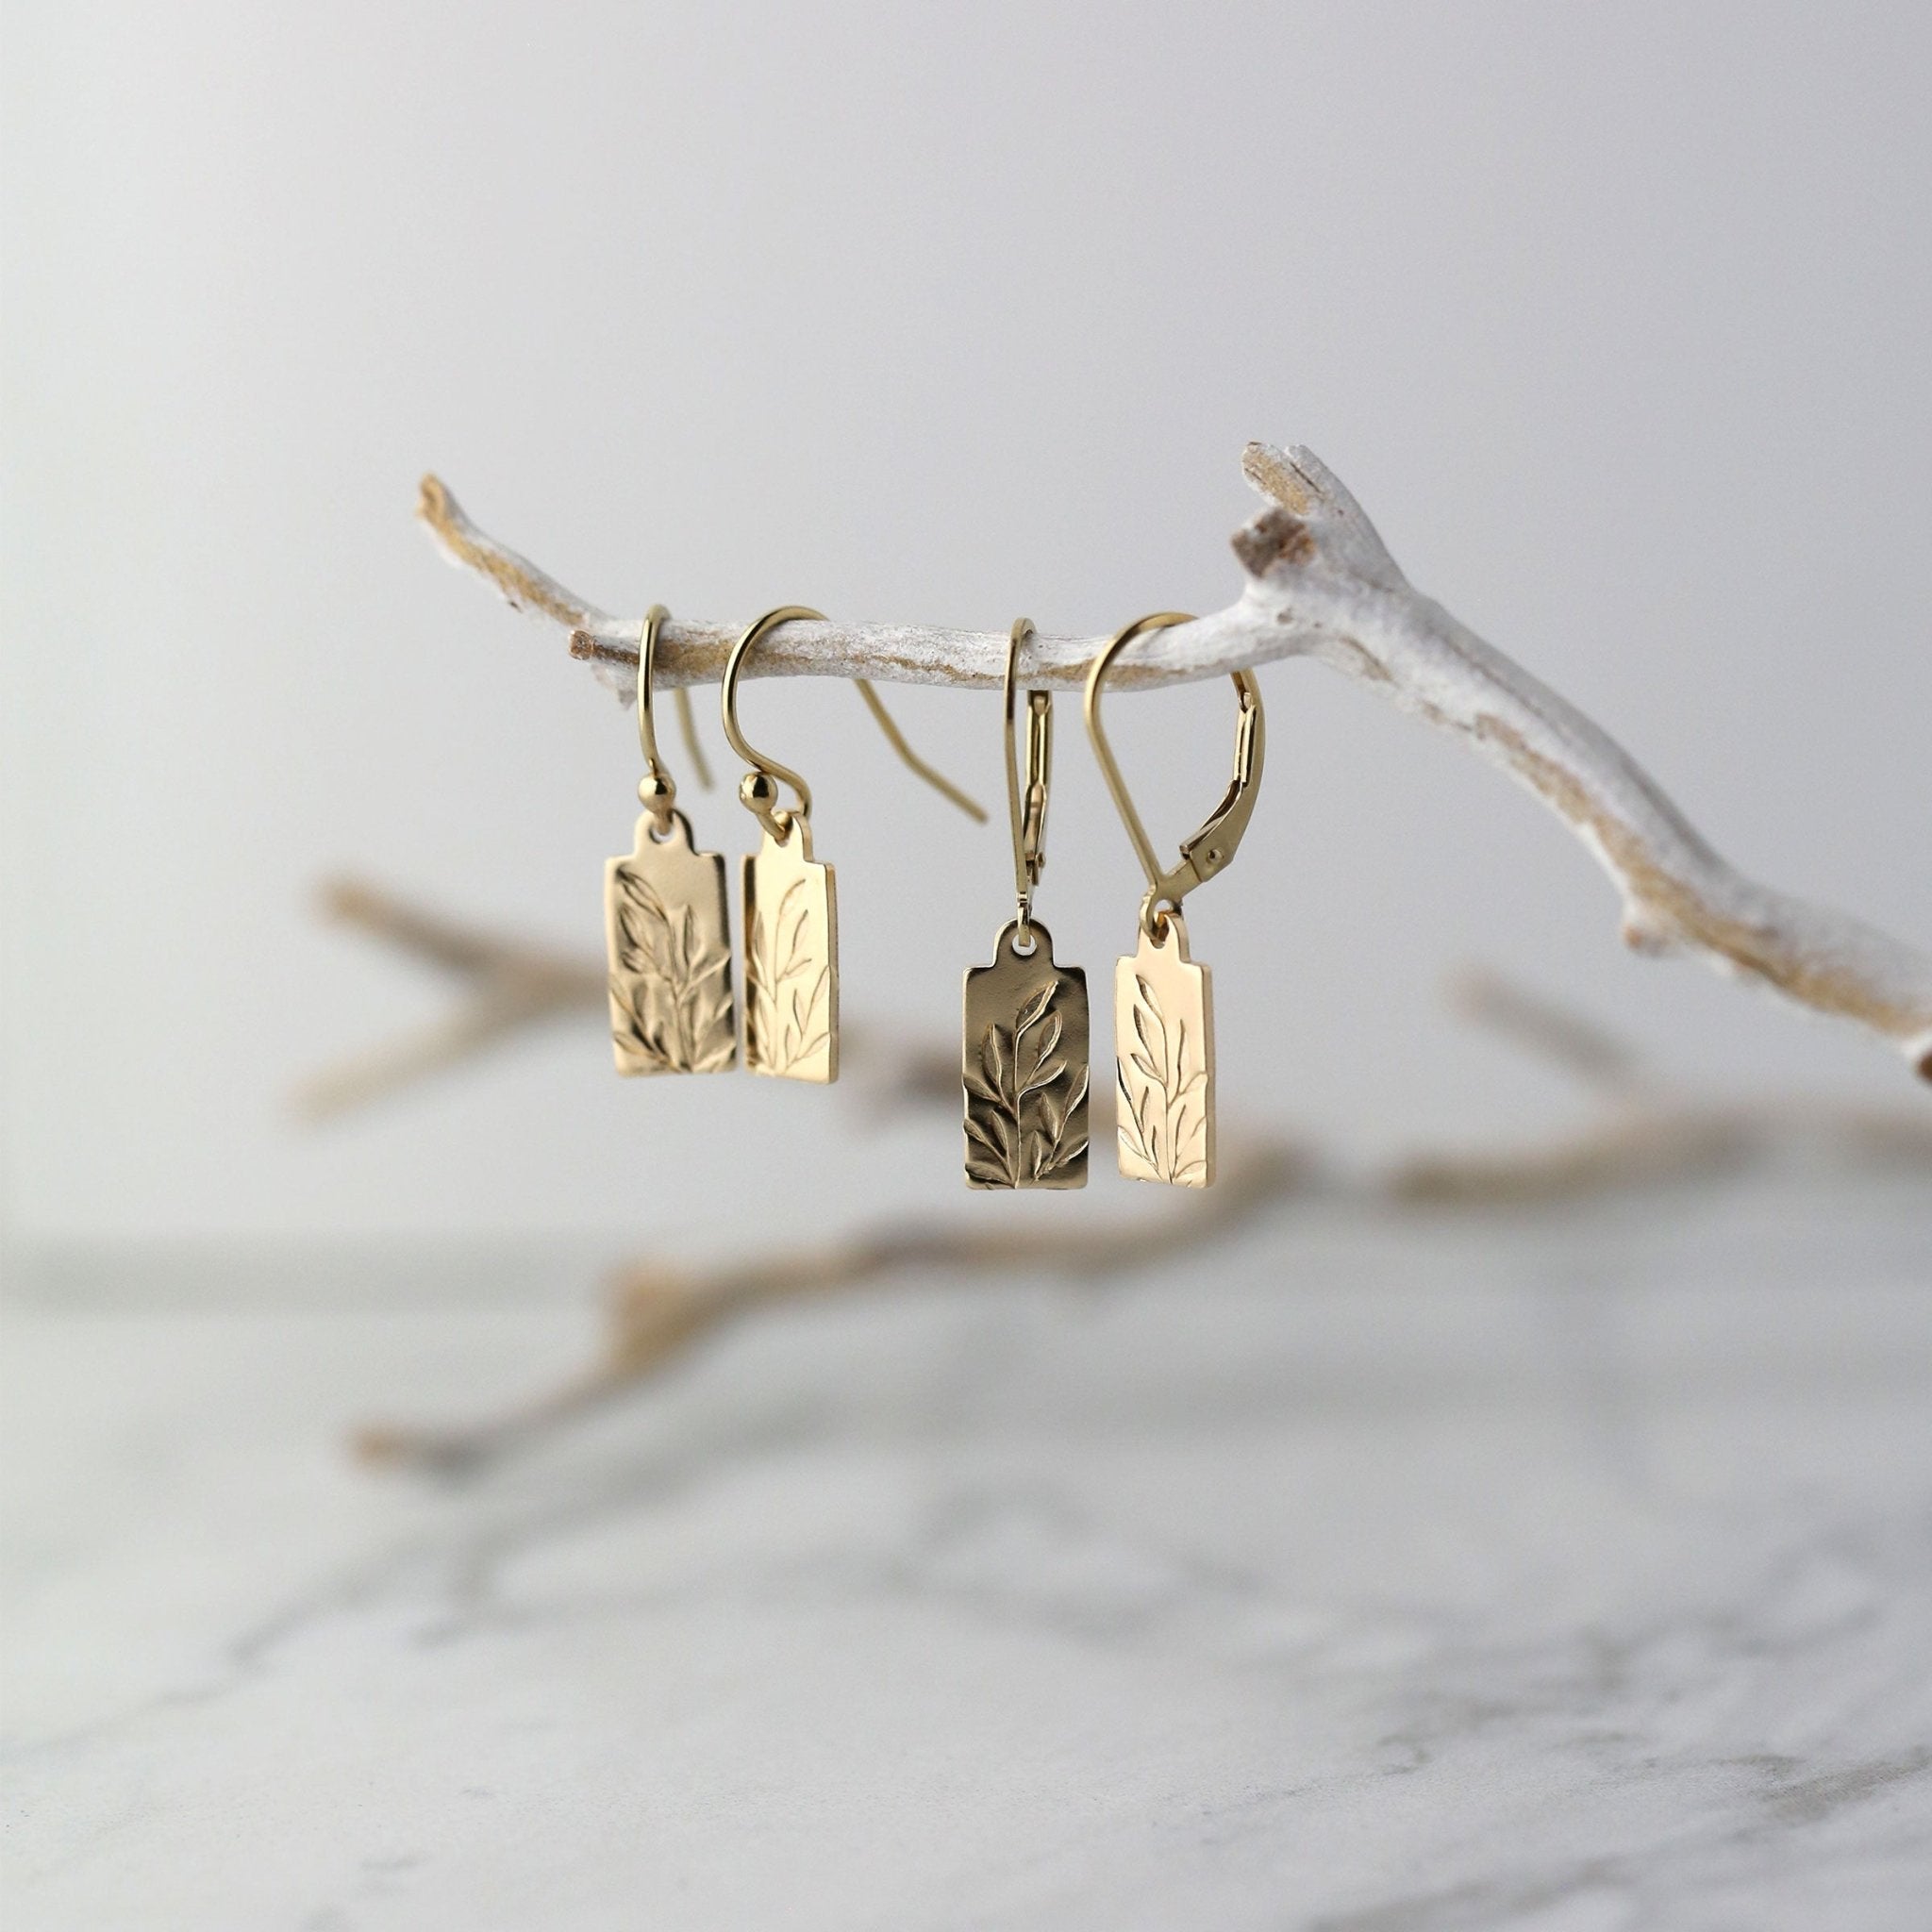 Tiny Willow Leaf Tag Earrings handmade by Burnish